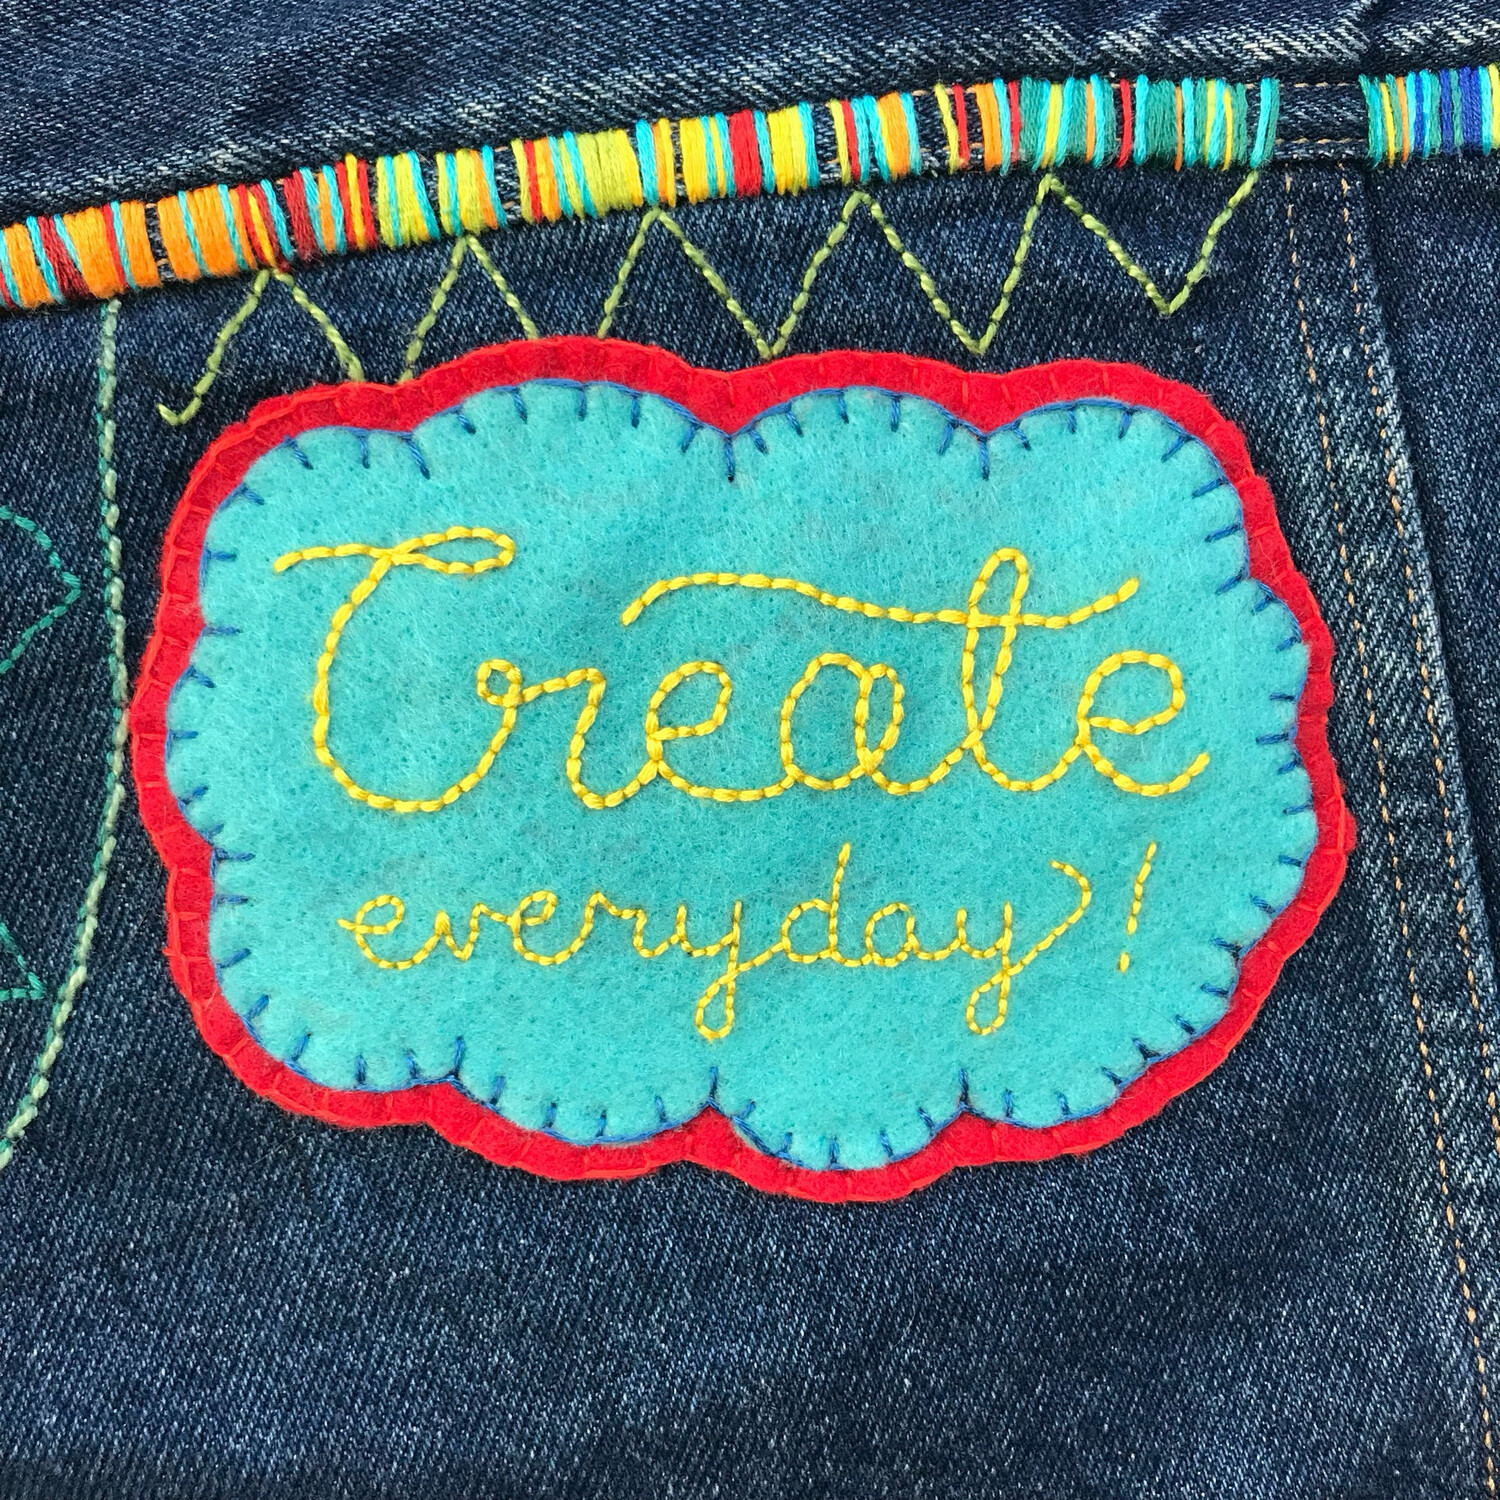 Embroidered Patches Crafternoon 4/27 4-6 pm